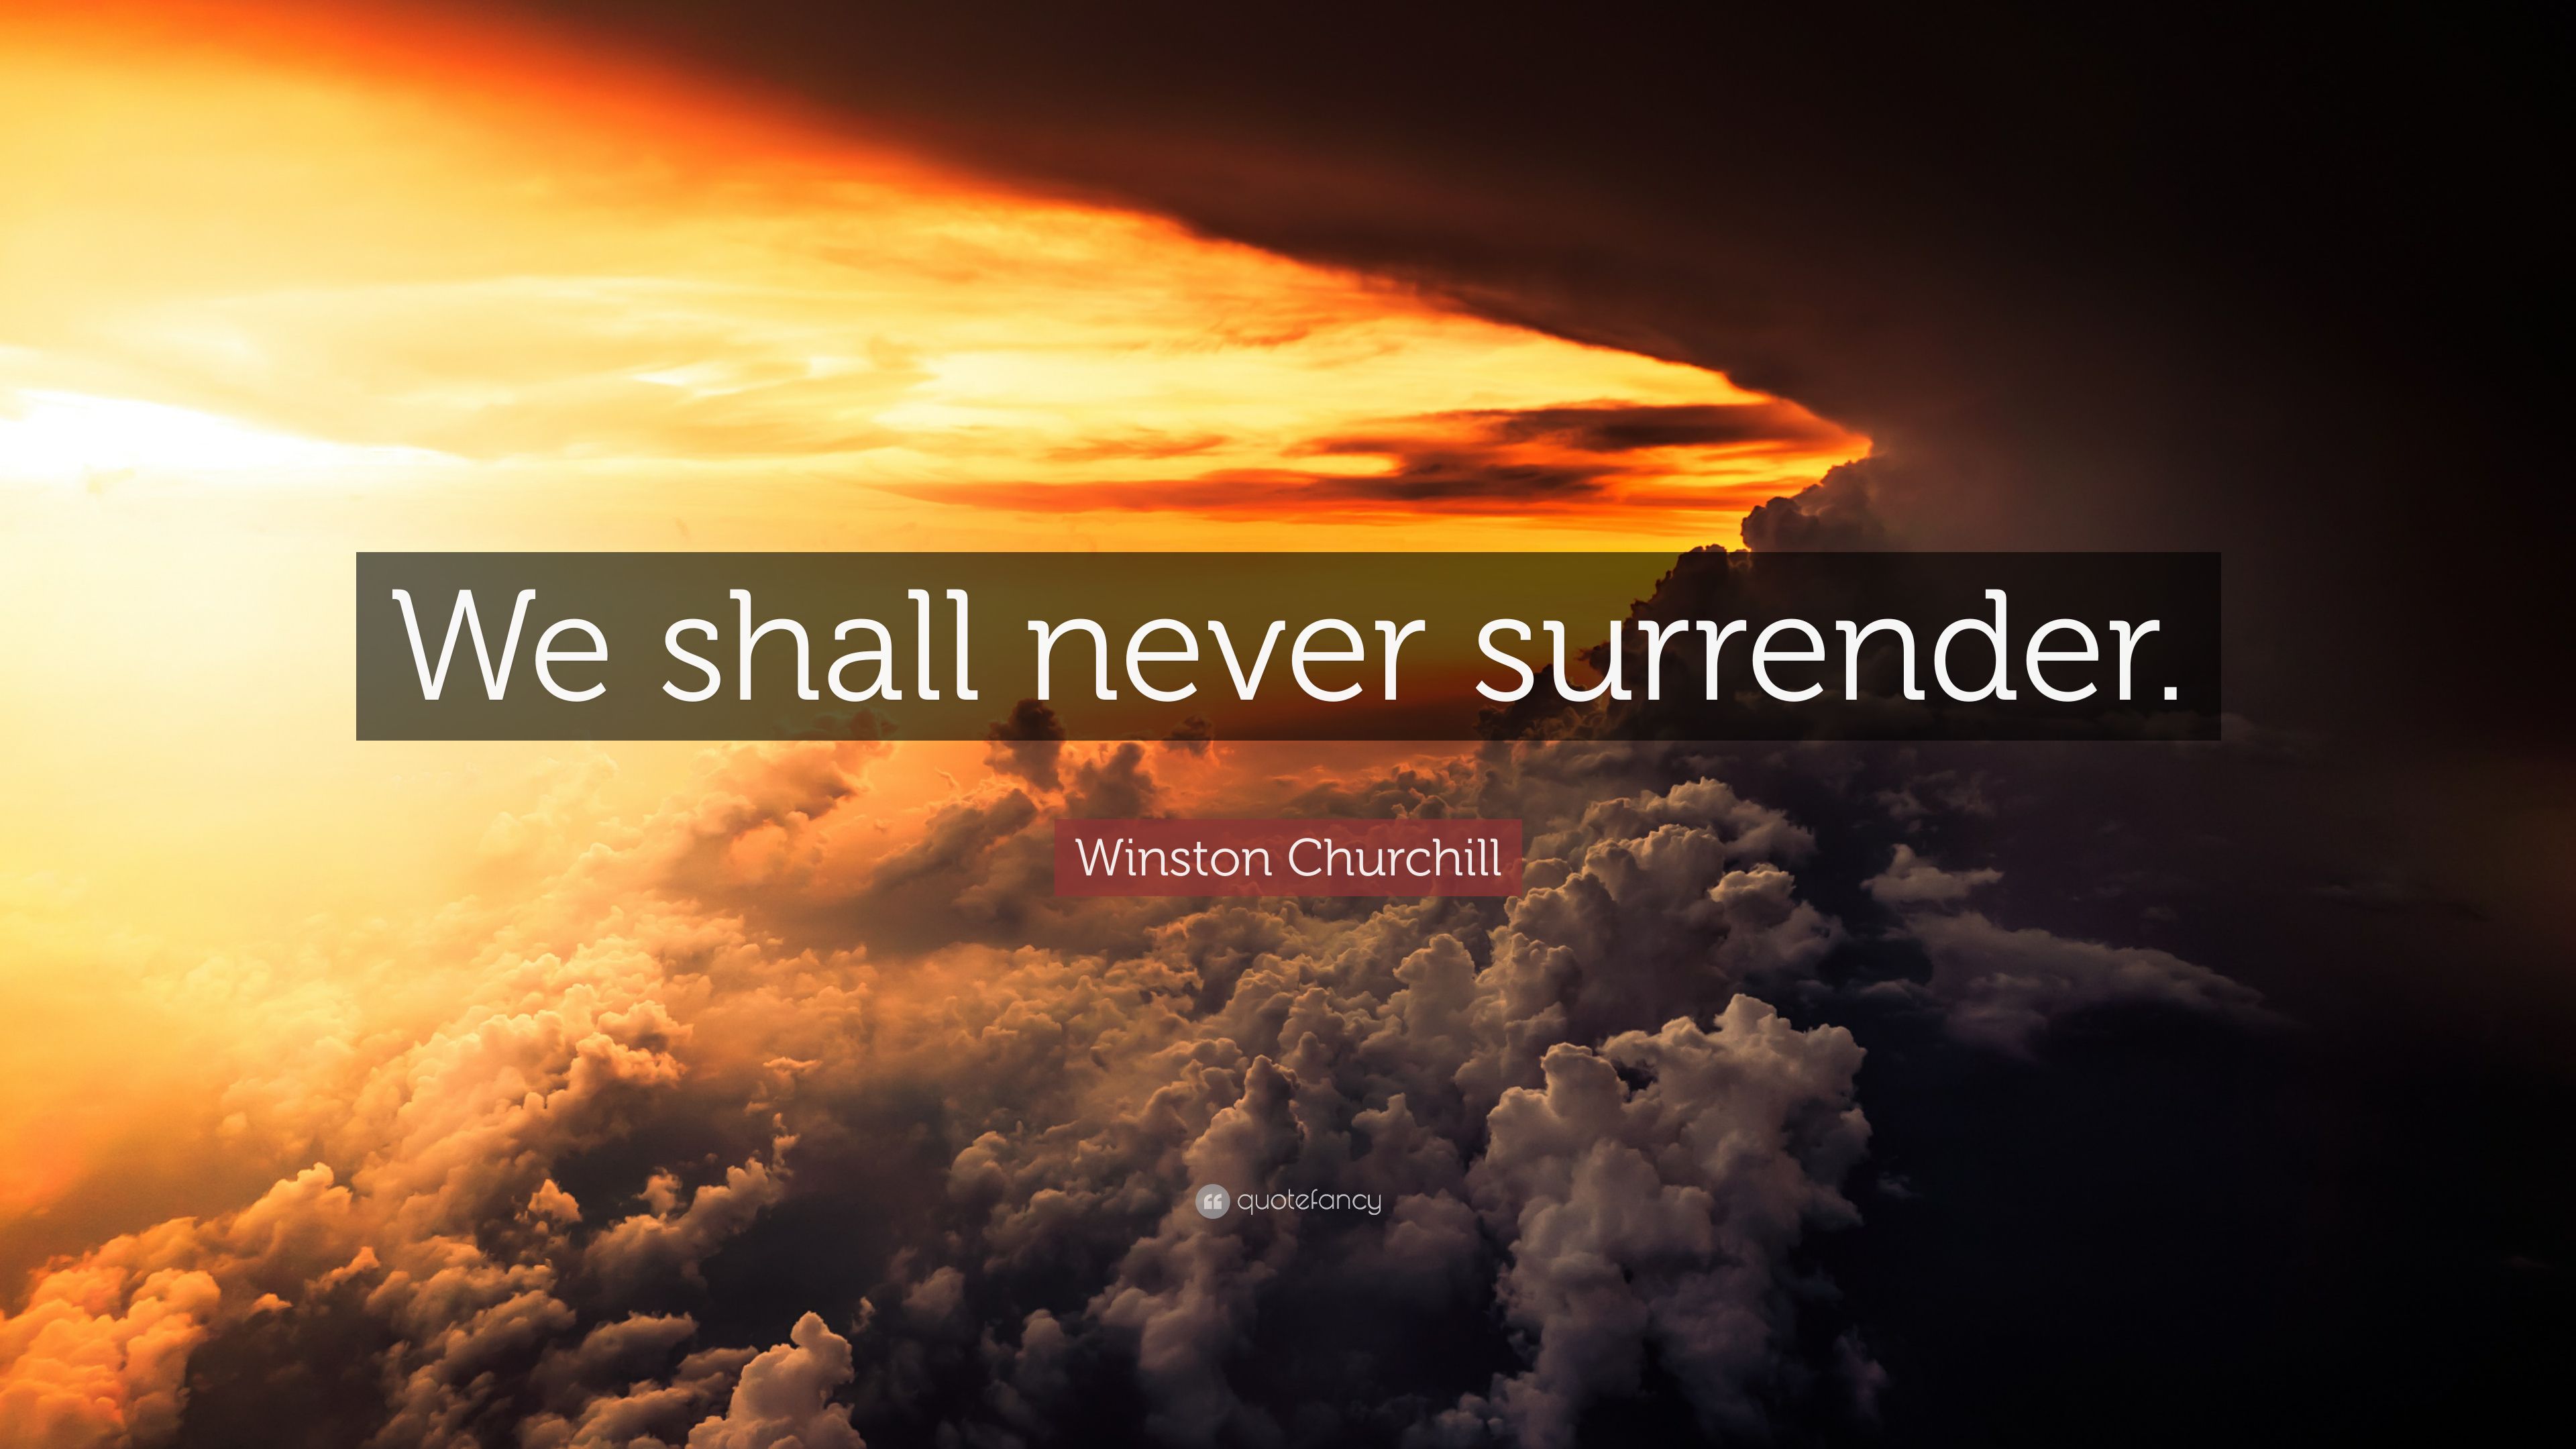 Winston Churchill Quote: “We shall never surrender.” (12 wallpaper)